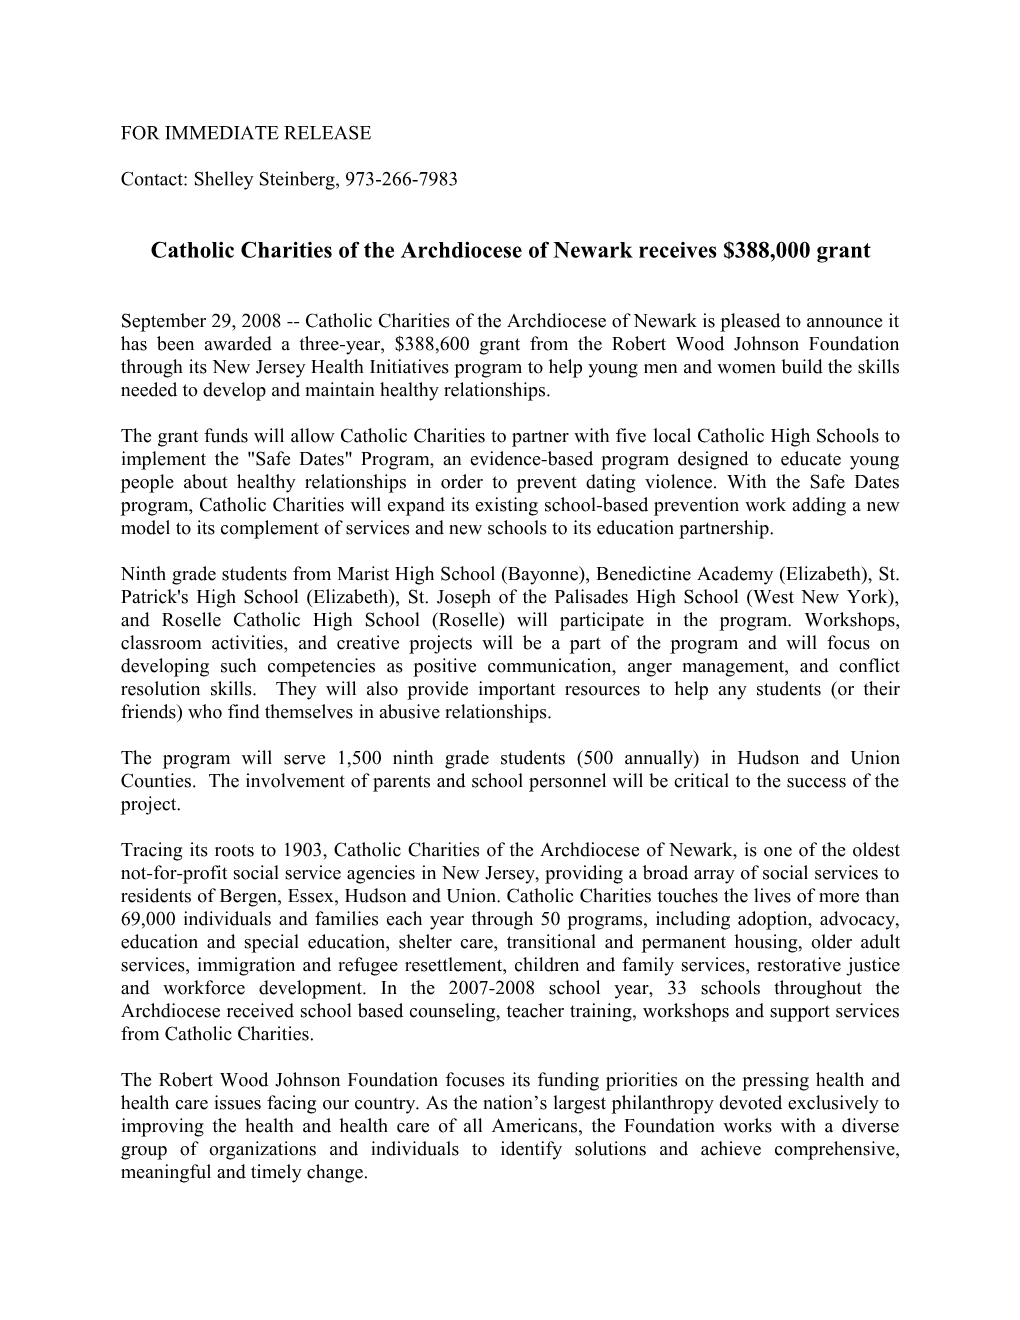 Catholic Charities of the Archdiocese of Newark Receives $388,000 Grant